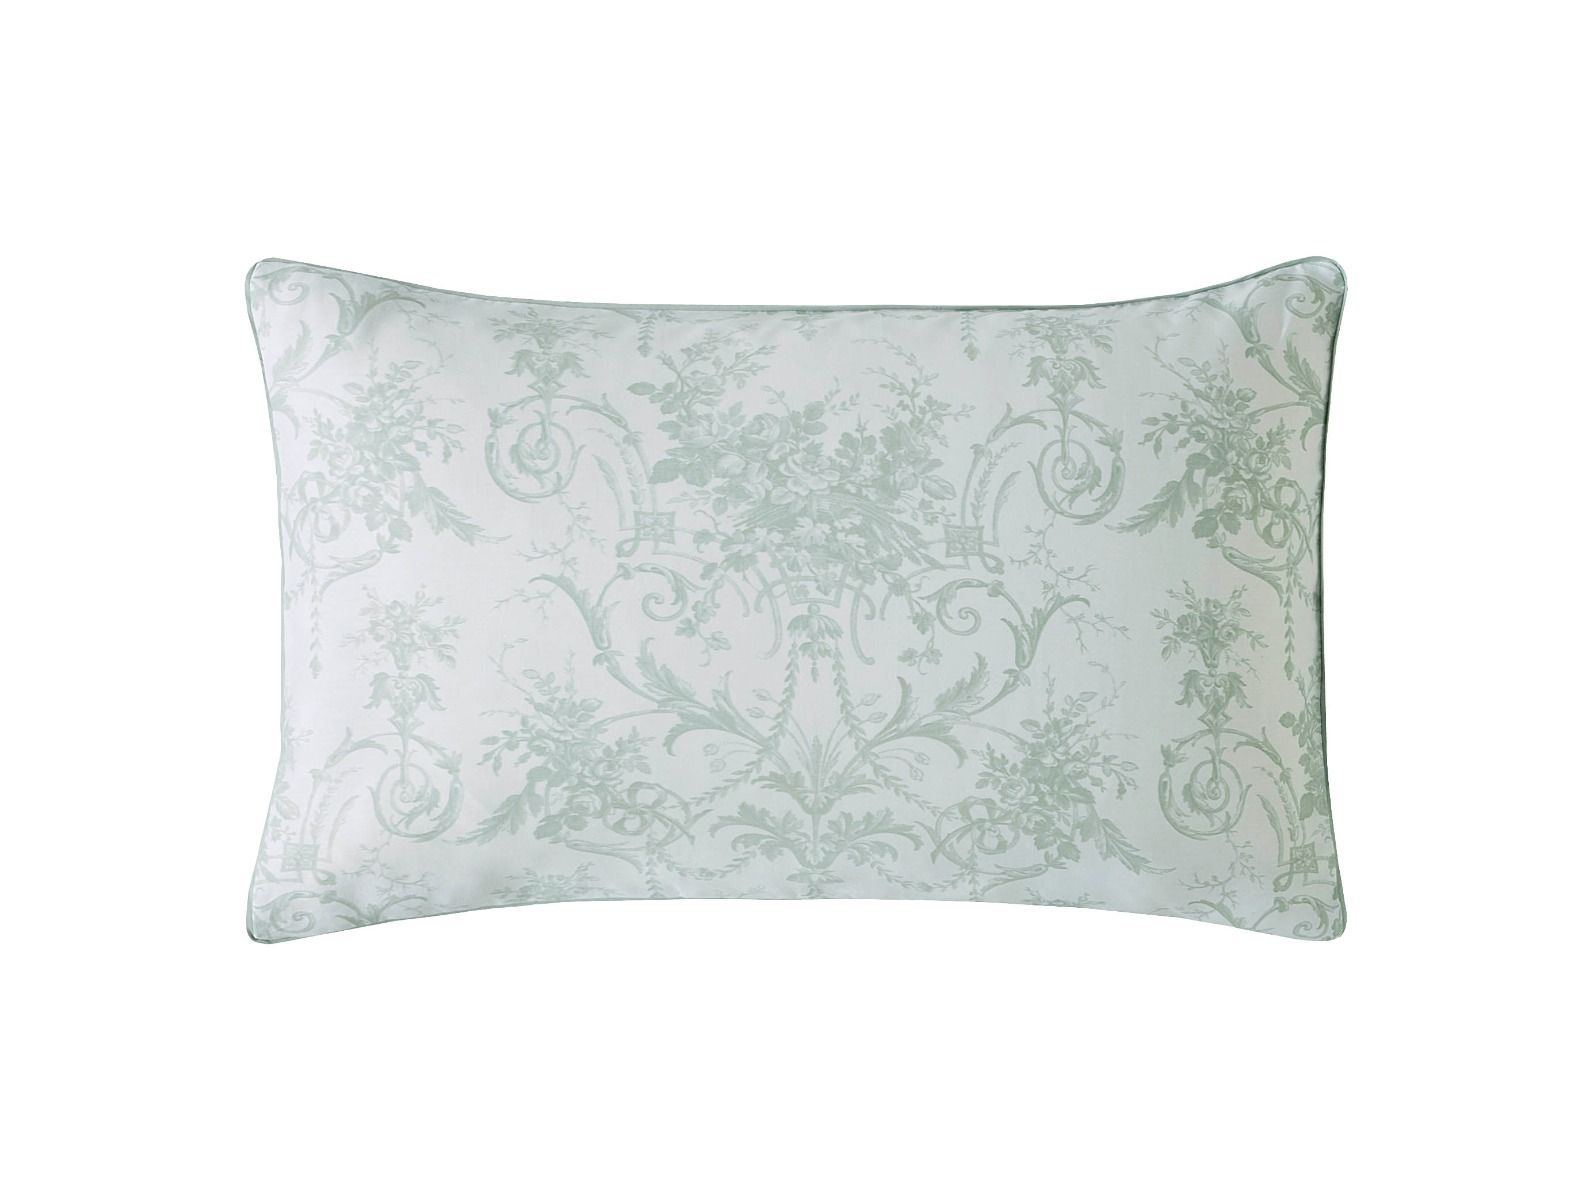 Laura Ashley Tuileries Sage Cover and Pillowcase Set